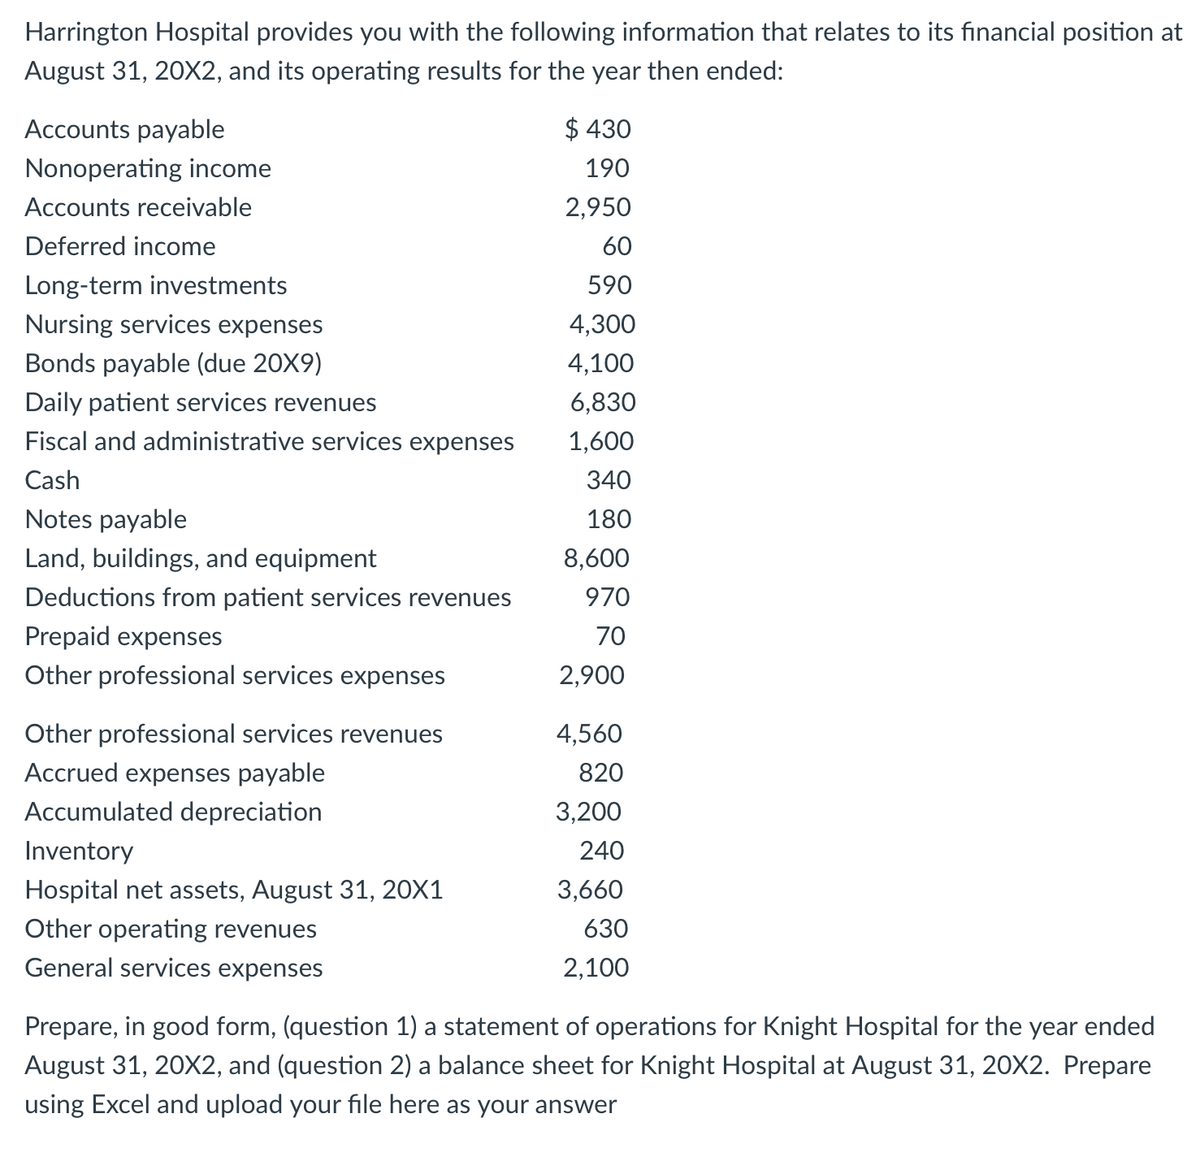 Harrington Hospital provides you with the following information that relates to its financial position at
August 31, 20X2, and its operating results for the year then ended:
Accounts payable
Nonoperating income
Accounts receivable
Deferred income
Long-term investments
Nursing services expenses
Bonds payable (due 20X9)
Daily patient services revenues
Fiscal and administrative services expenses
Cash
Notes payable
Land, buildings, and equipment
Deductions from patient services revenues
Prepaid expenses
Other professional services expenses
Other professional services revenues
Accrued expenses payable
Accumulated depreciation
Inventory
Hospital net assets, August 31, 20X1
Other operating revenues
General services expenses
$ 430
190
2,950
60
590
4,300
4,100
6,830
1,600
340
180
8,600
970
70
2,900
4,560
820
3,200
240
3,660
630
2,100
Prepare, in good form, (question 1) a statement of operations for Knight Hospital for the year ended
August 31, 20X2, and (question 2) a balance sheet for Knight Hospital at August 31, 20X2. Prepare
using Excel and upload your file here as your answer